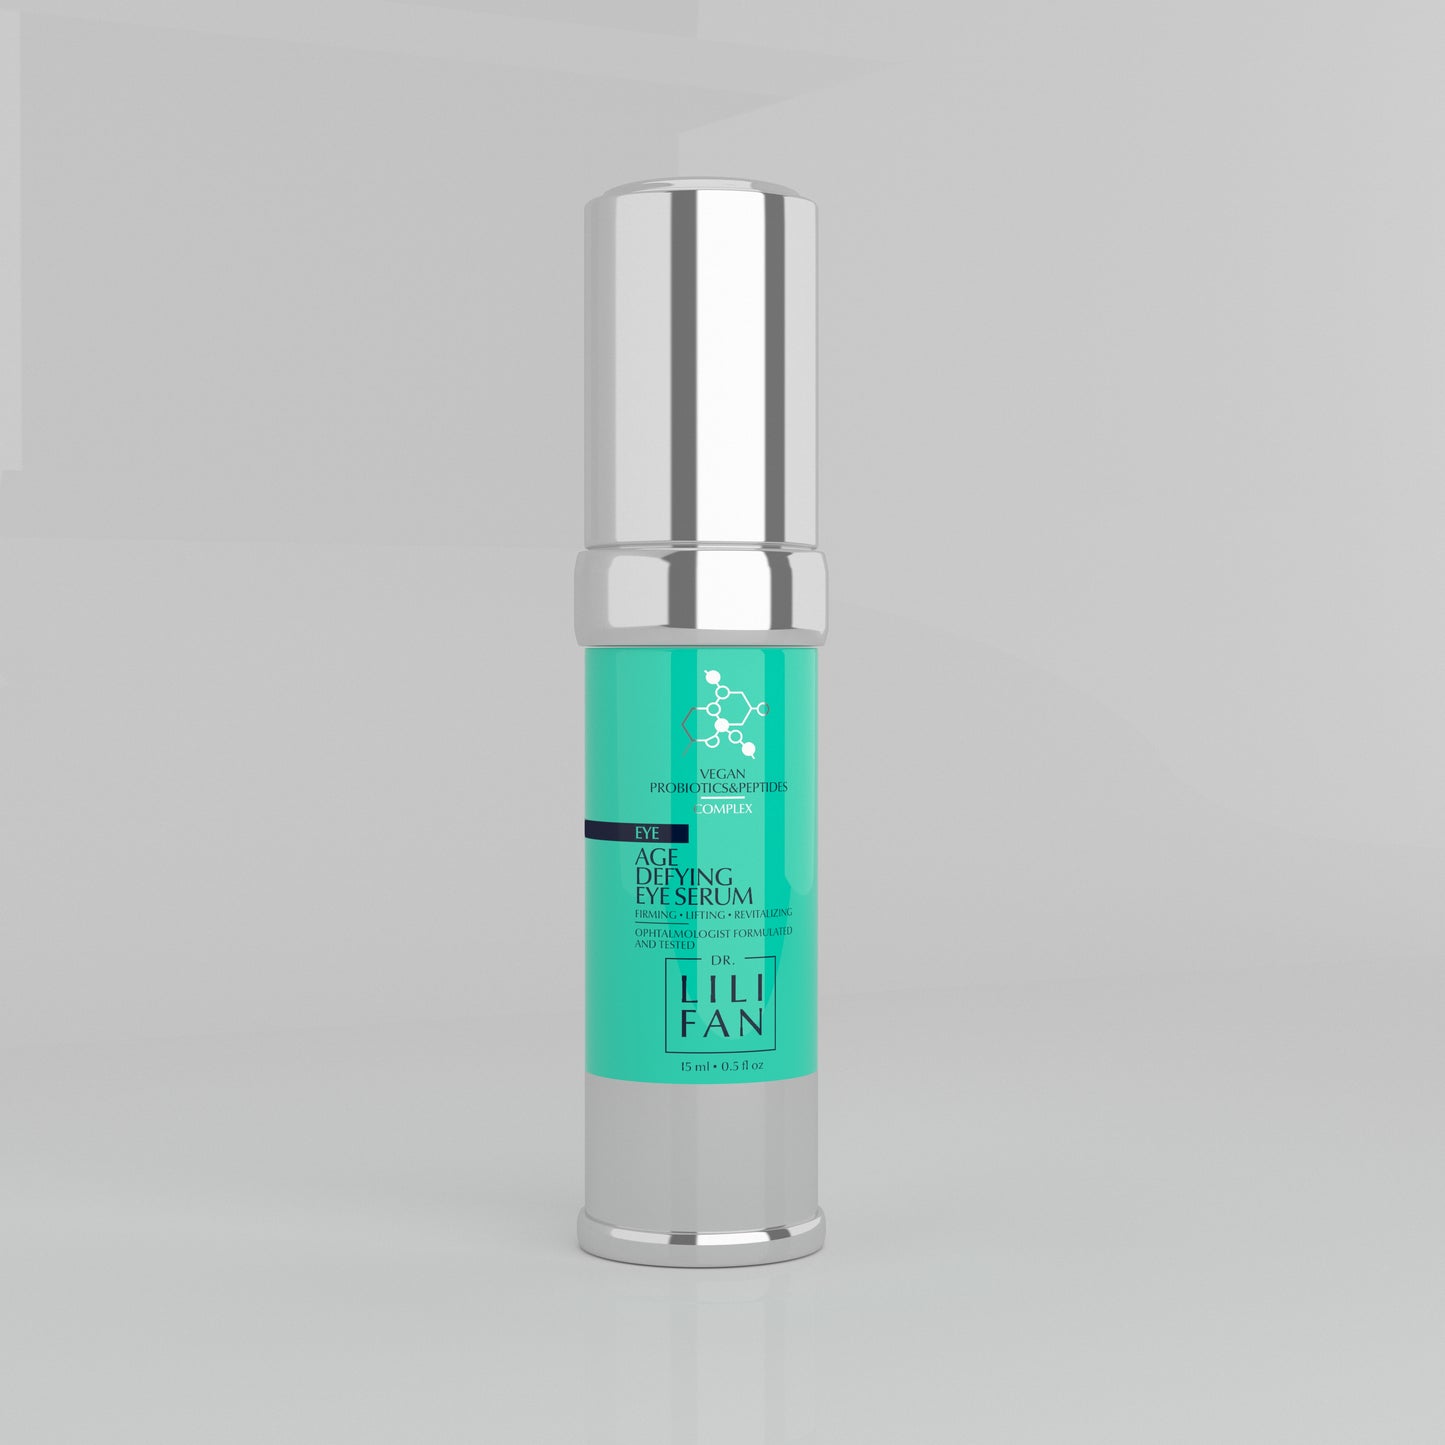 A bottle of Eye Serum on a tan background